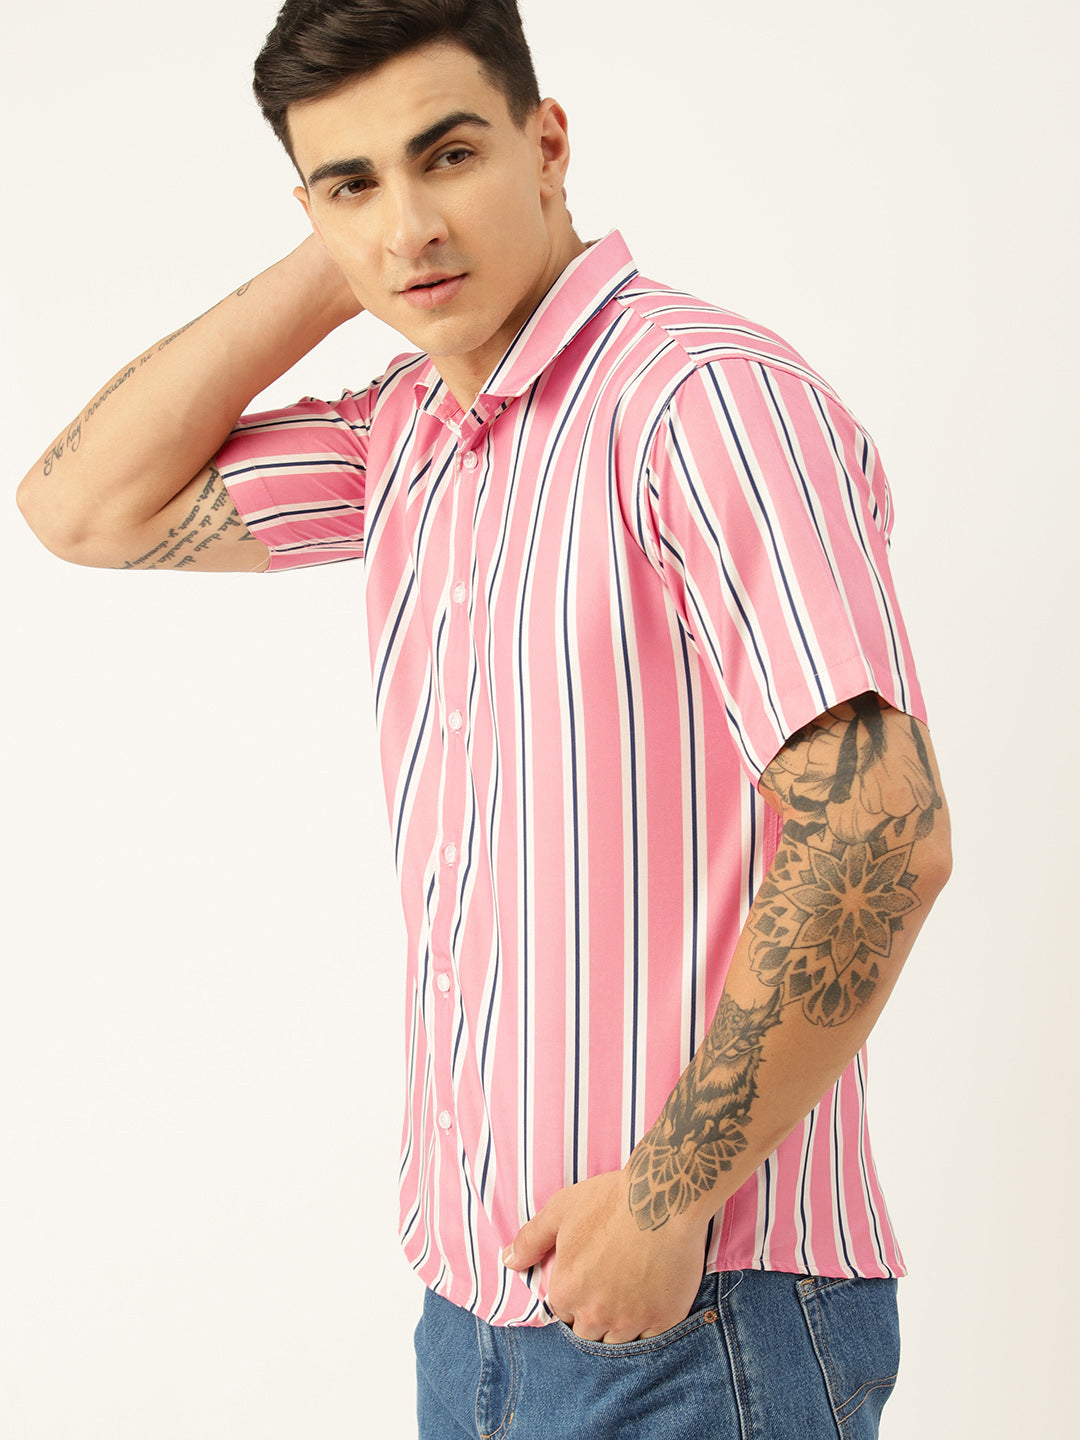 Luxrio Men's Stripped Half Sleeves Casual Shirt Pink